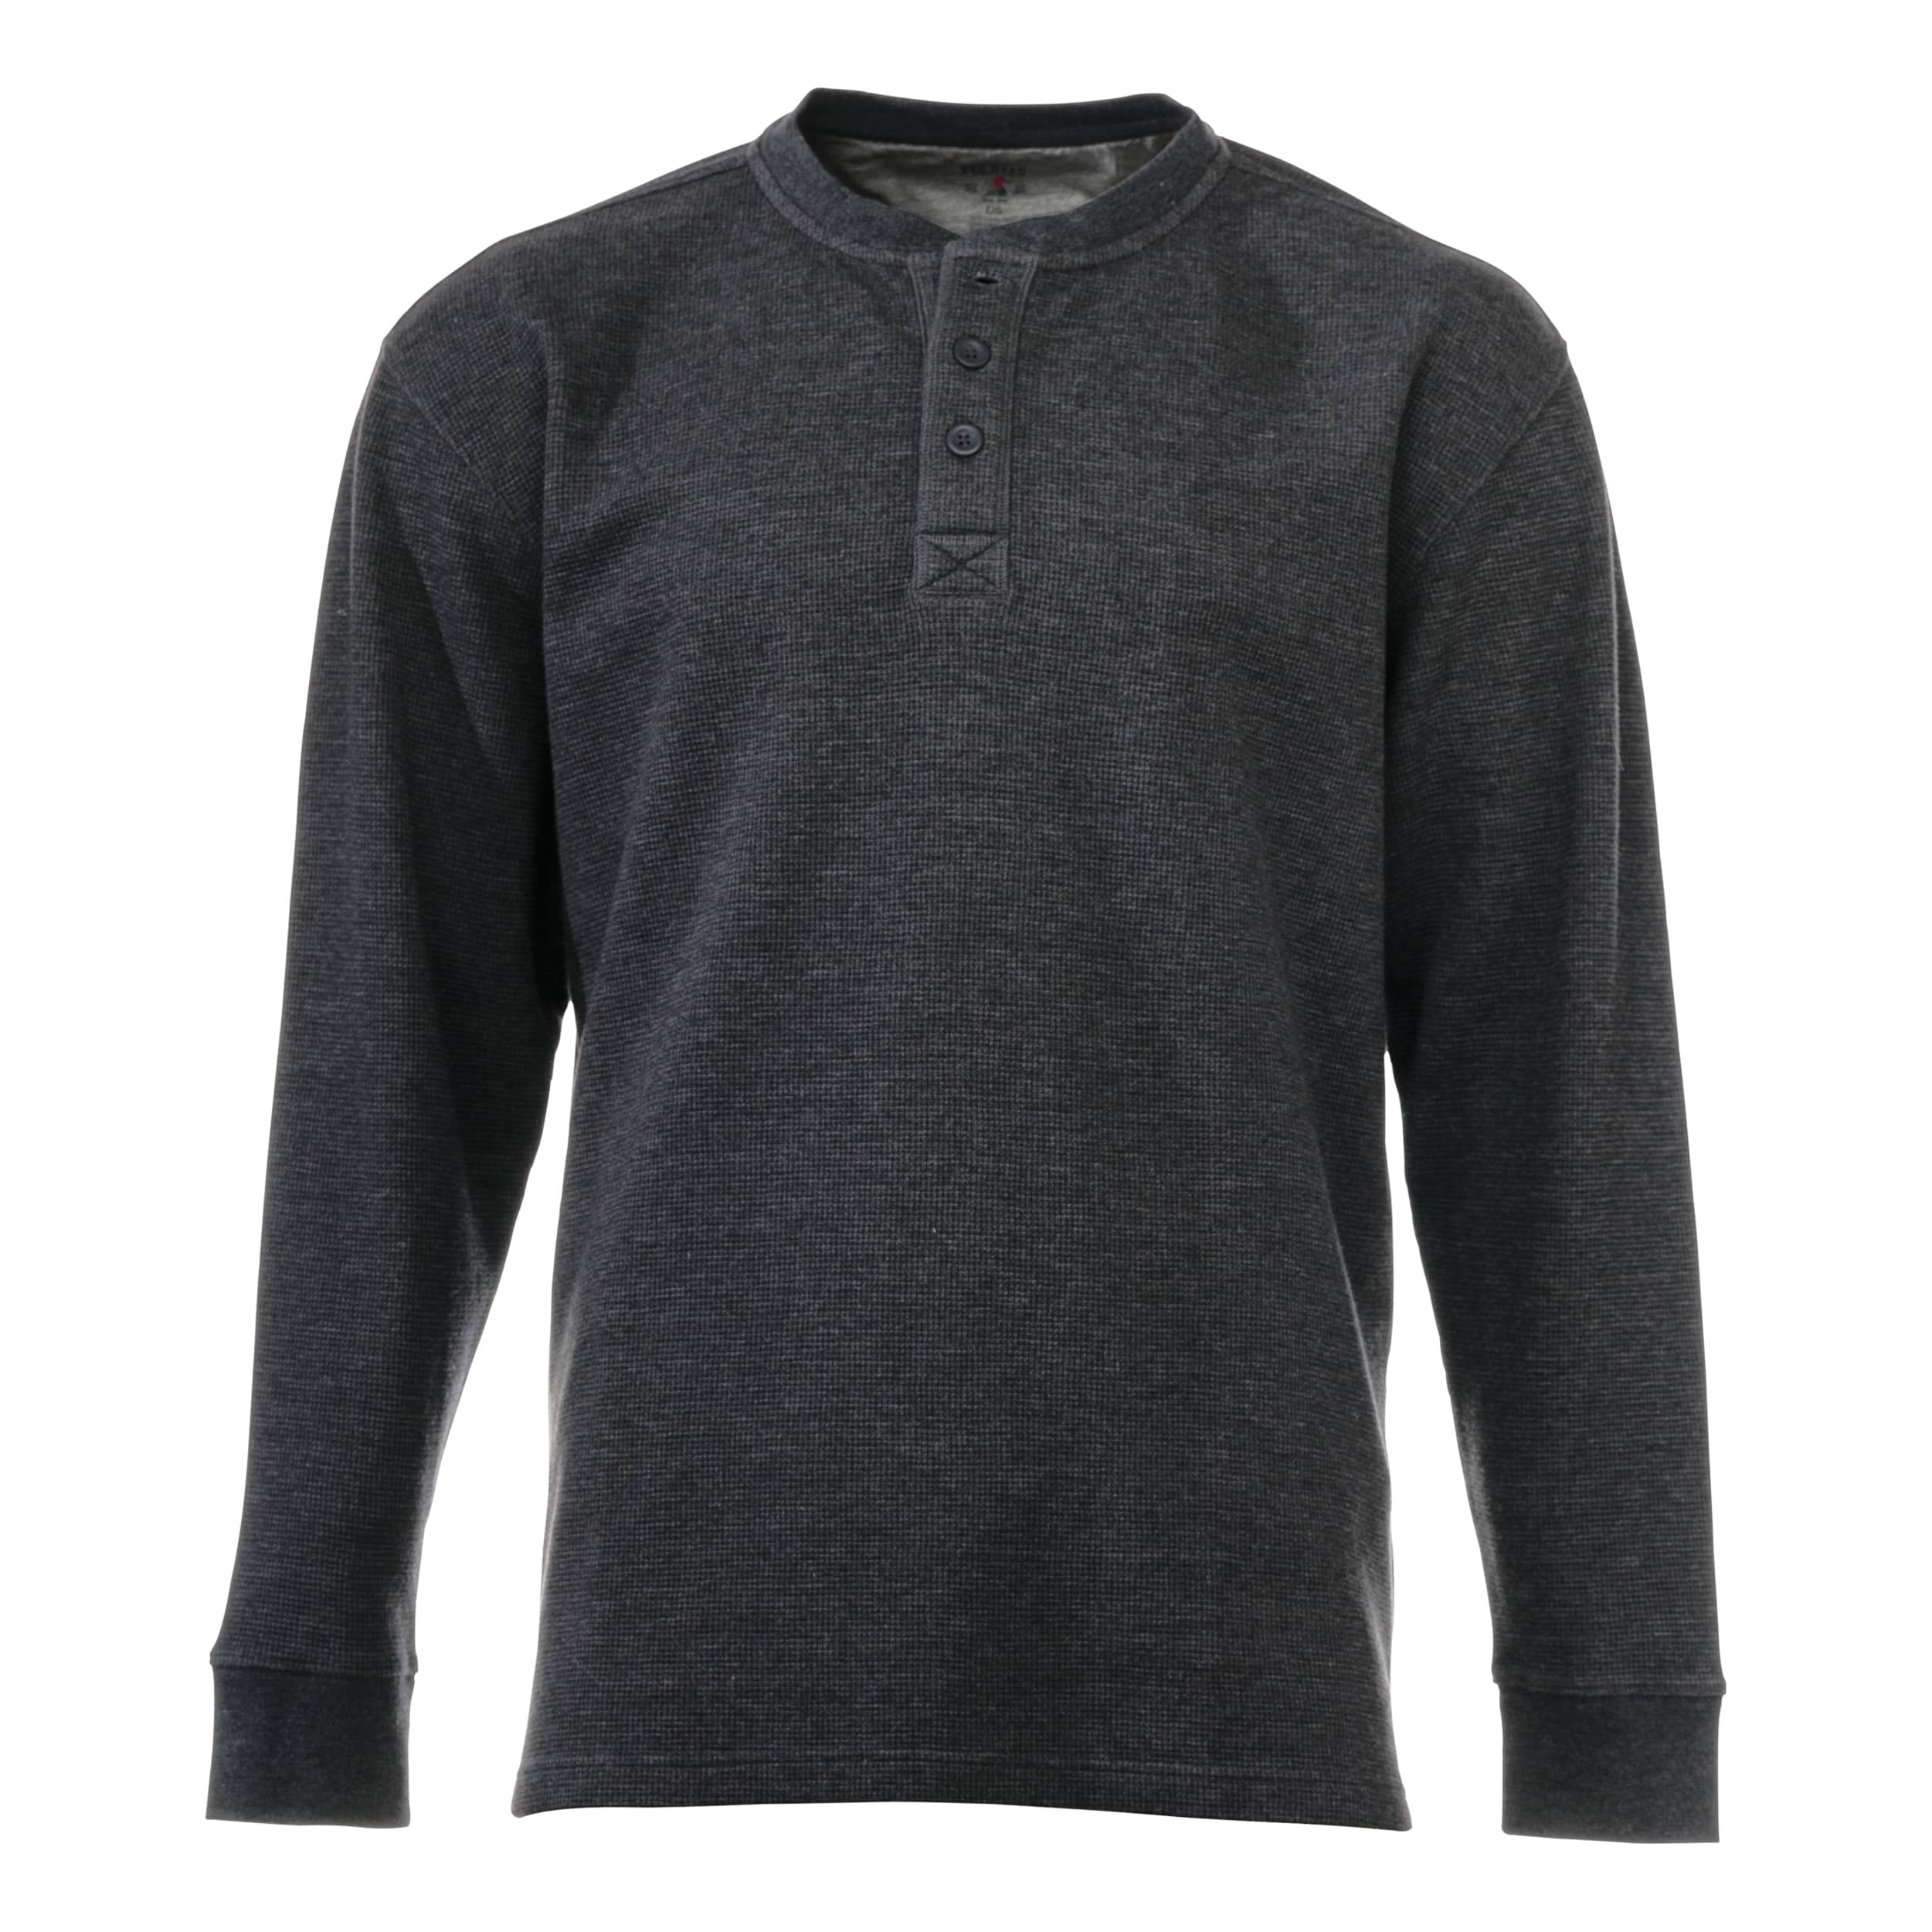 RedHead Men’s Thermal Henley Shirt - Charcoal Heather